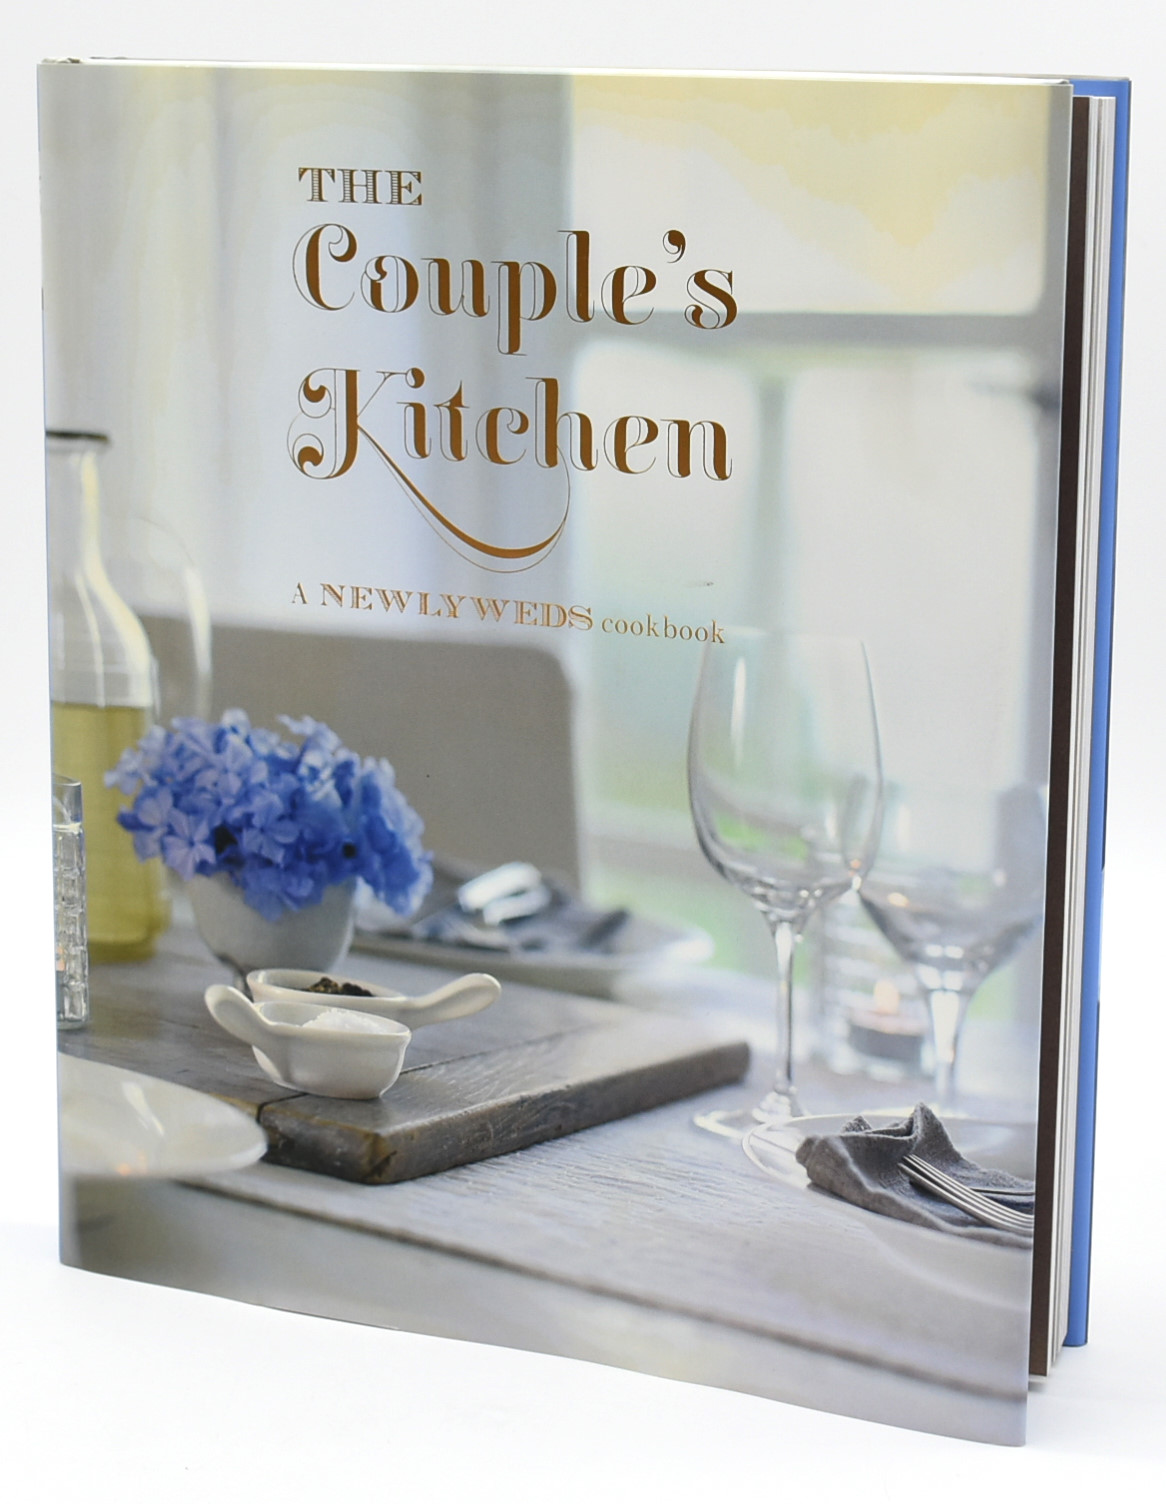 BOOK,  COOKING,  THE COUPLES KITCHEN,  ISBN 9781849754996